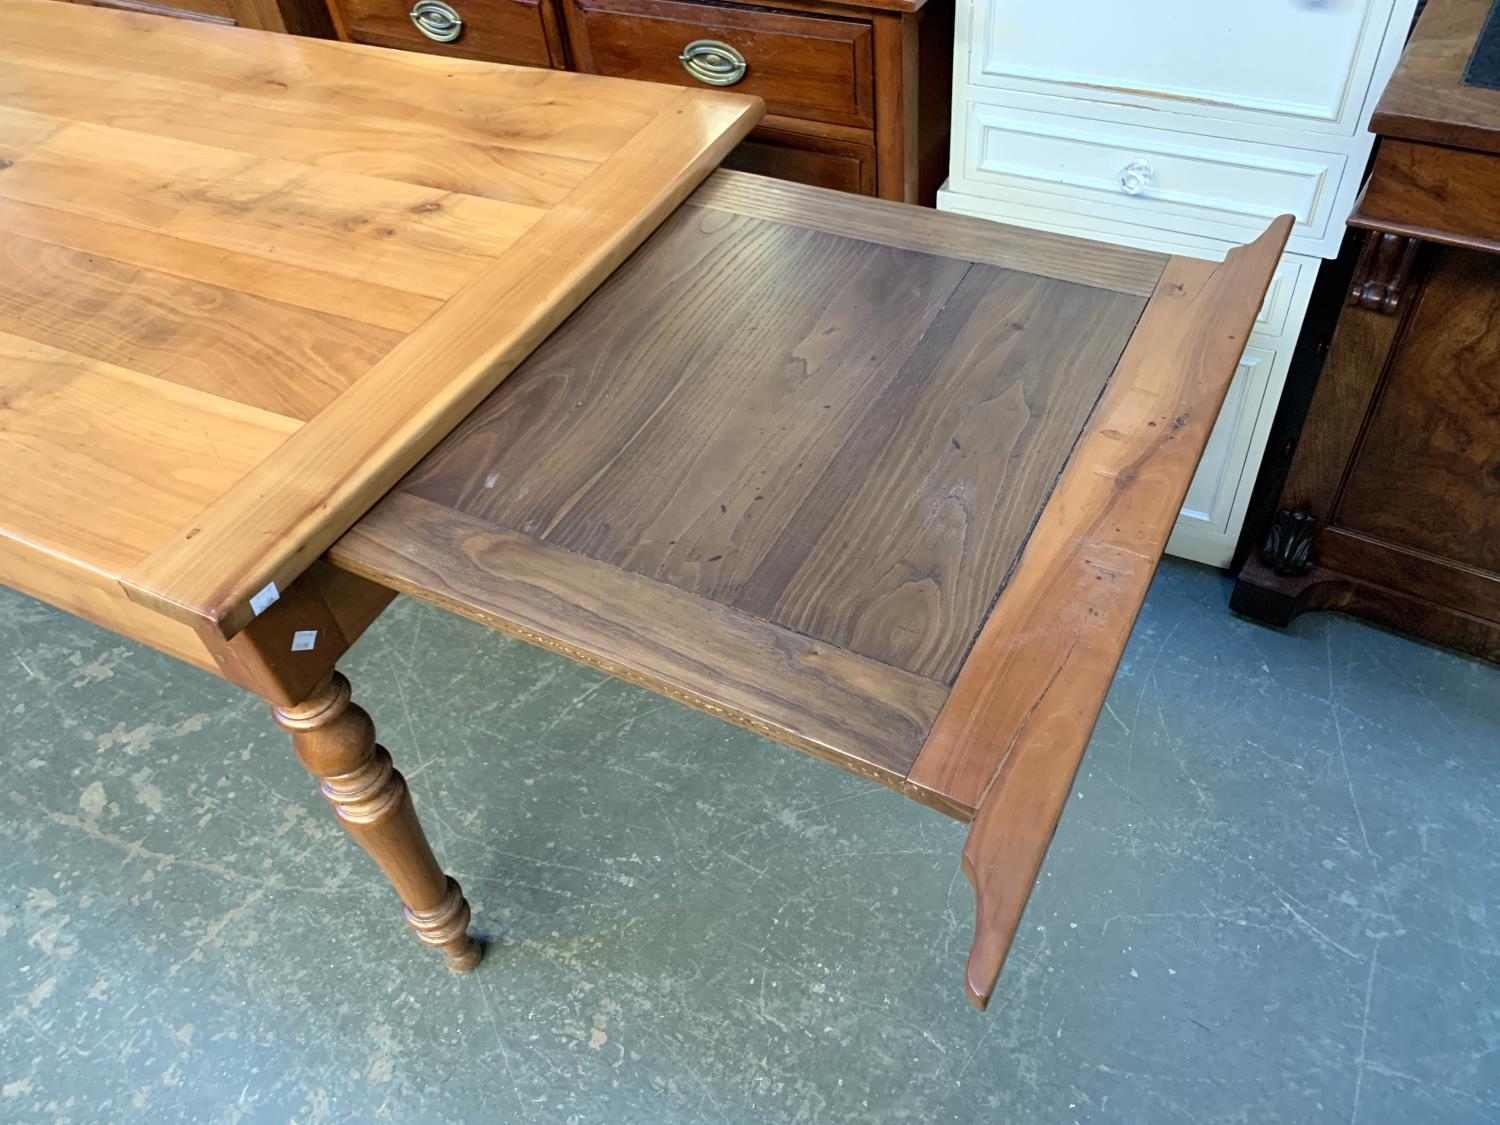 A French fruitwood farmhouse kitchen table, with bread slide, 195x85x73cmH - Image 3 of 3